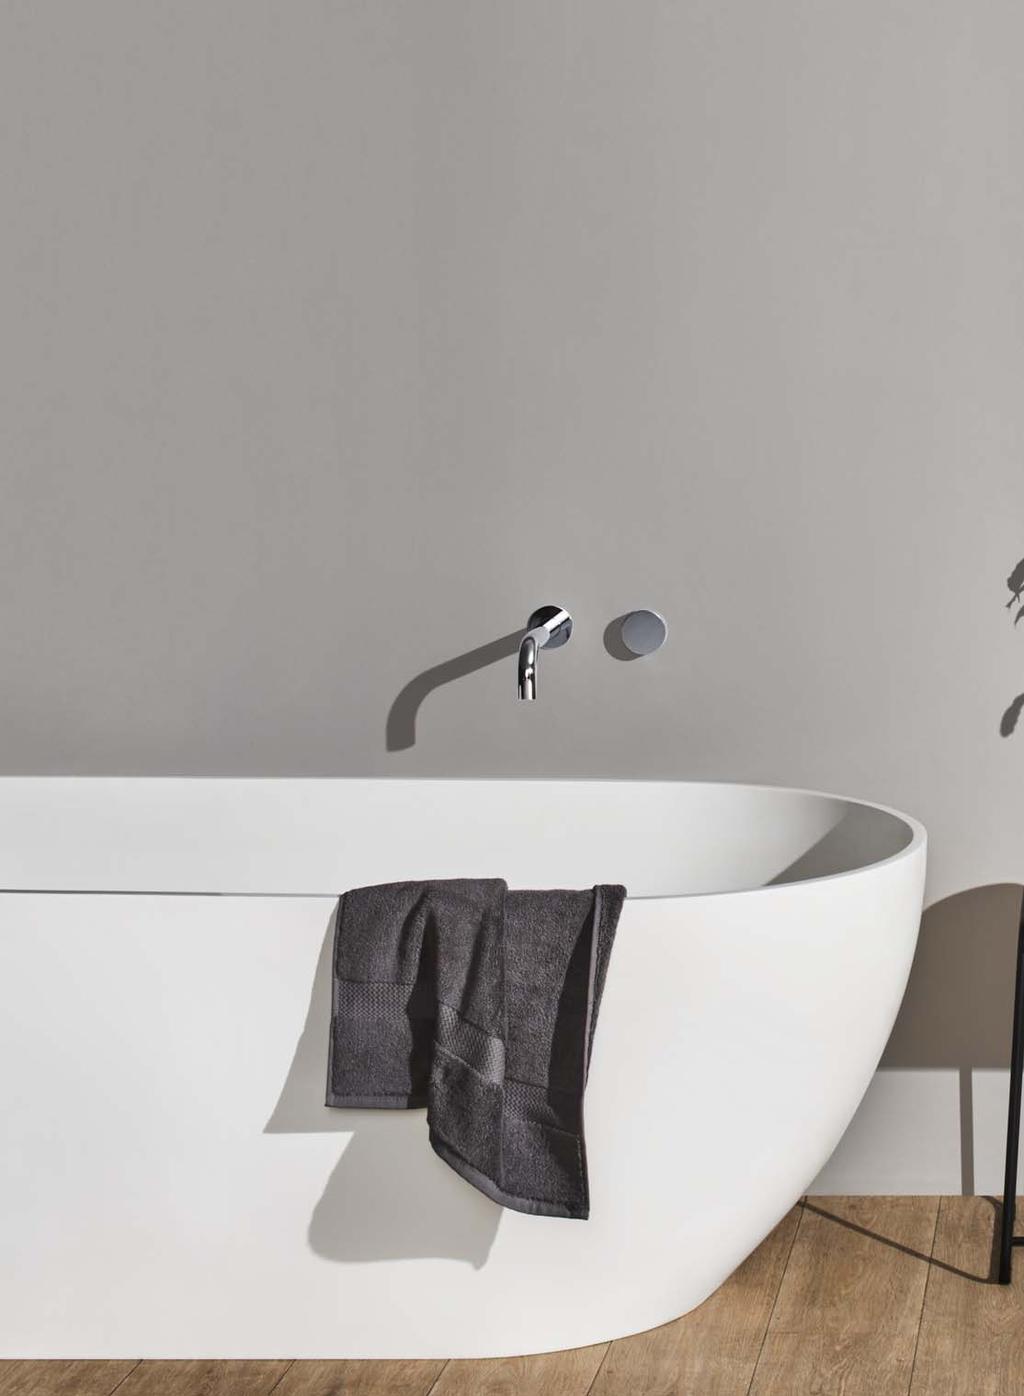 BATHROOM MEET Milli is about confident style enduring designs that enhance the way we live and